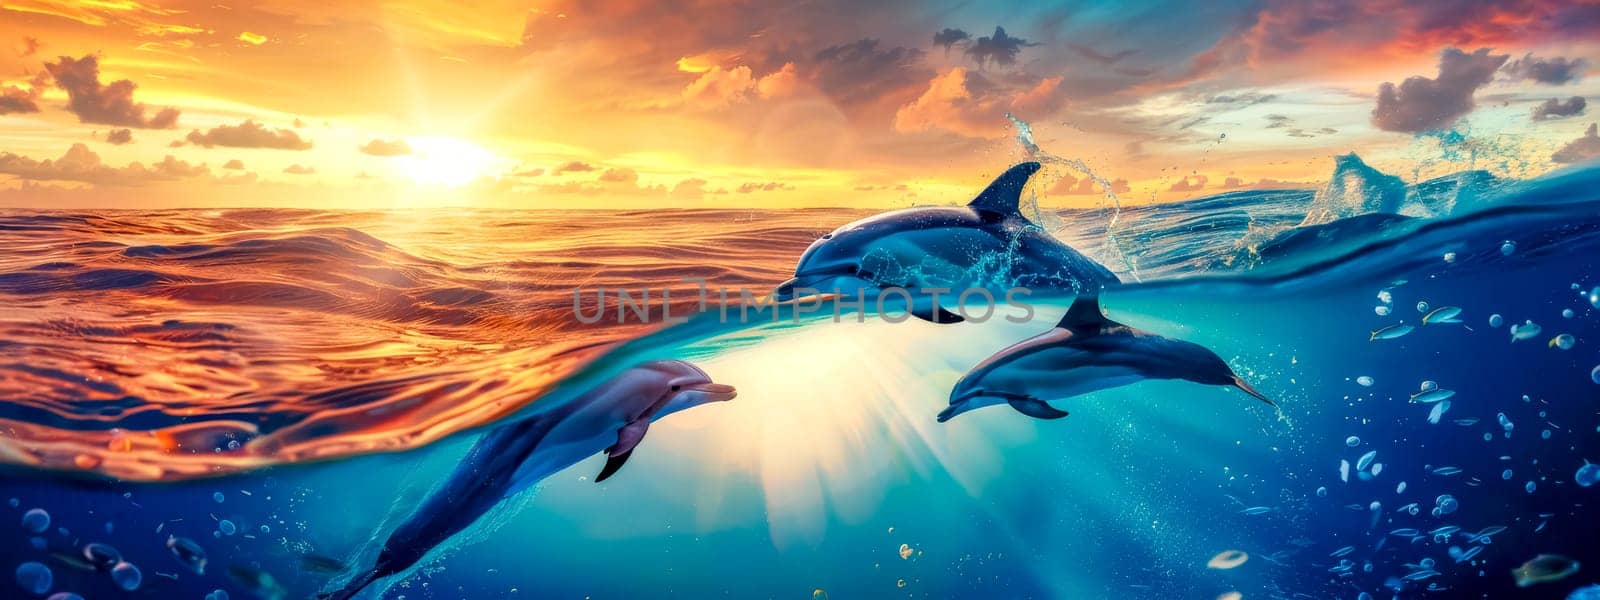 Dolphins leaping at sunset in ocean by Edophoto